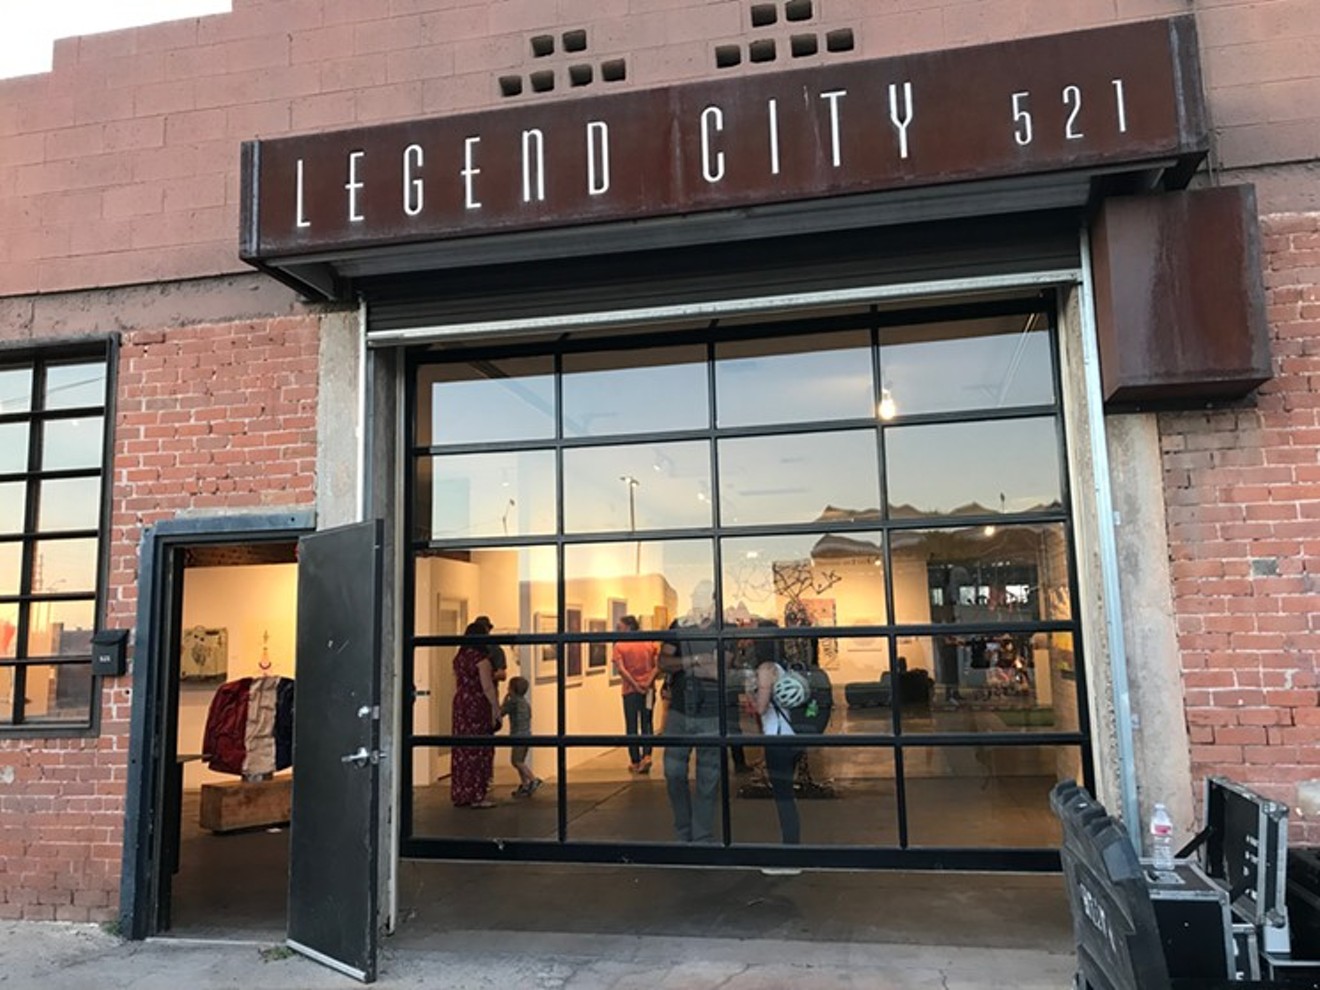 Legend City Studios in downtown Phoenix hosts the annual "Chaos Theory" exhibition this weekend.